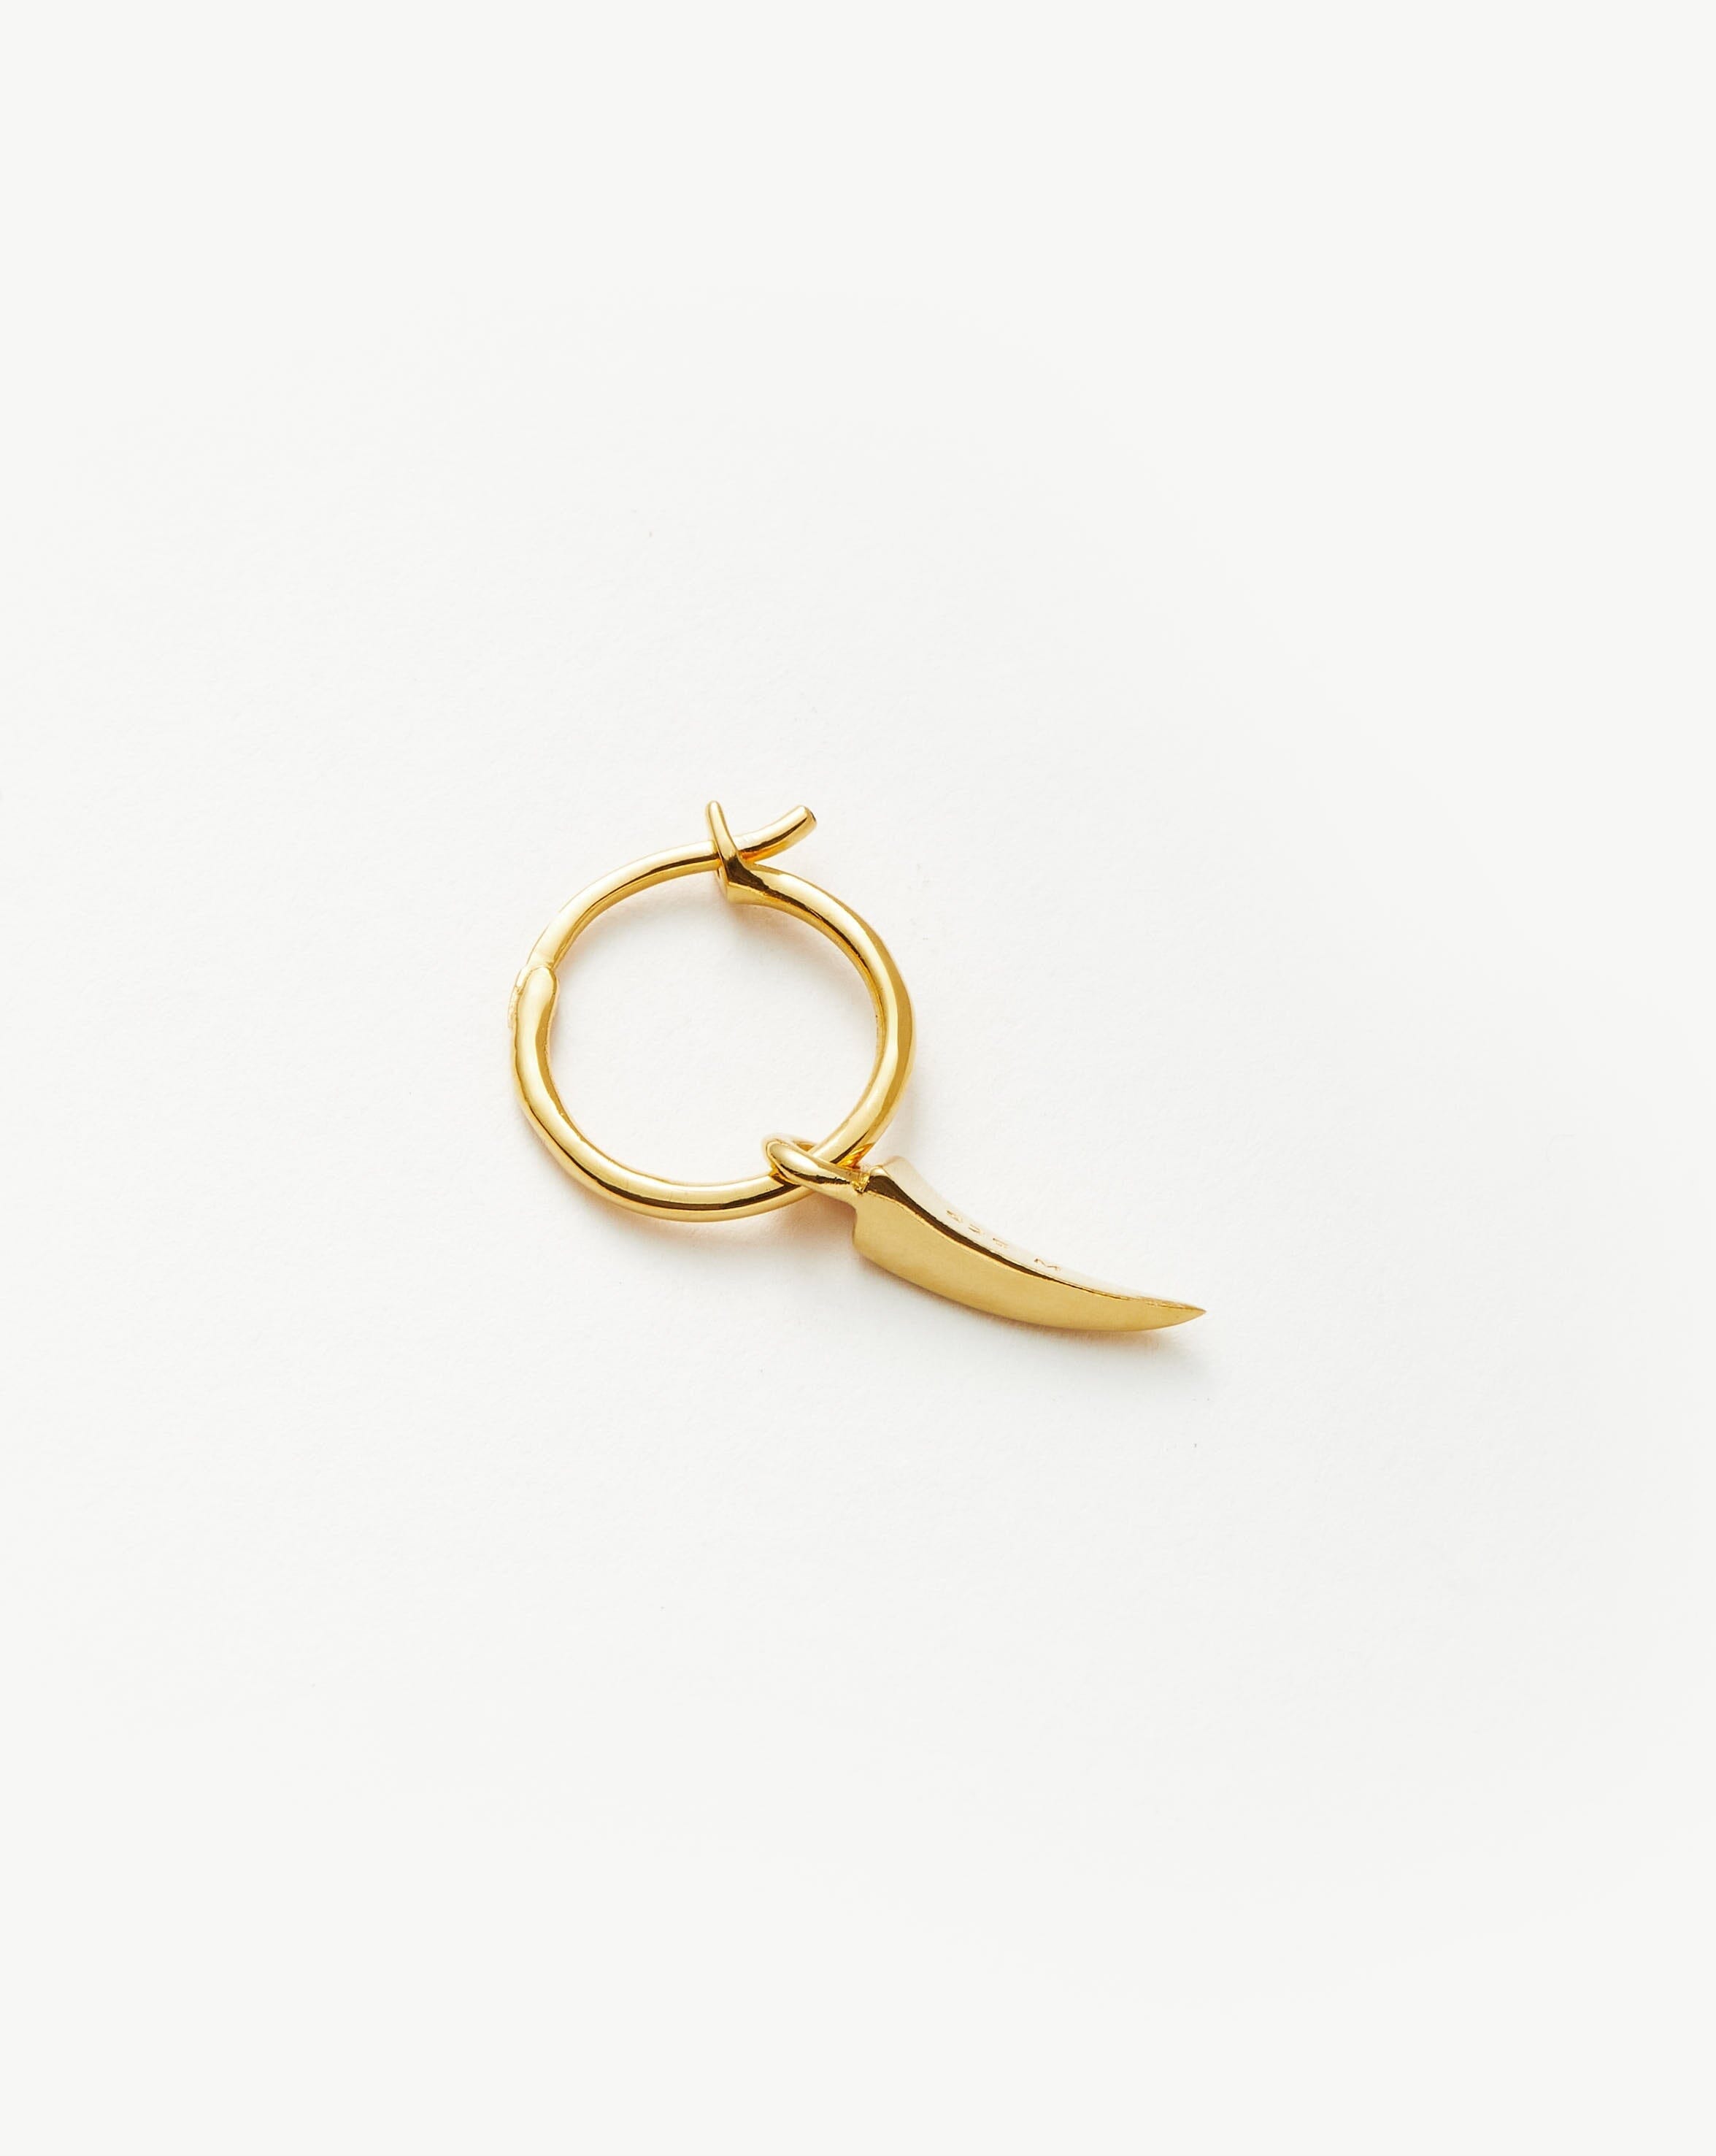 Louis Vuitton Charm and Pearl Yellow Gold Hoop Earrings